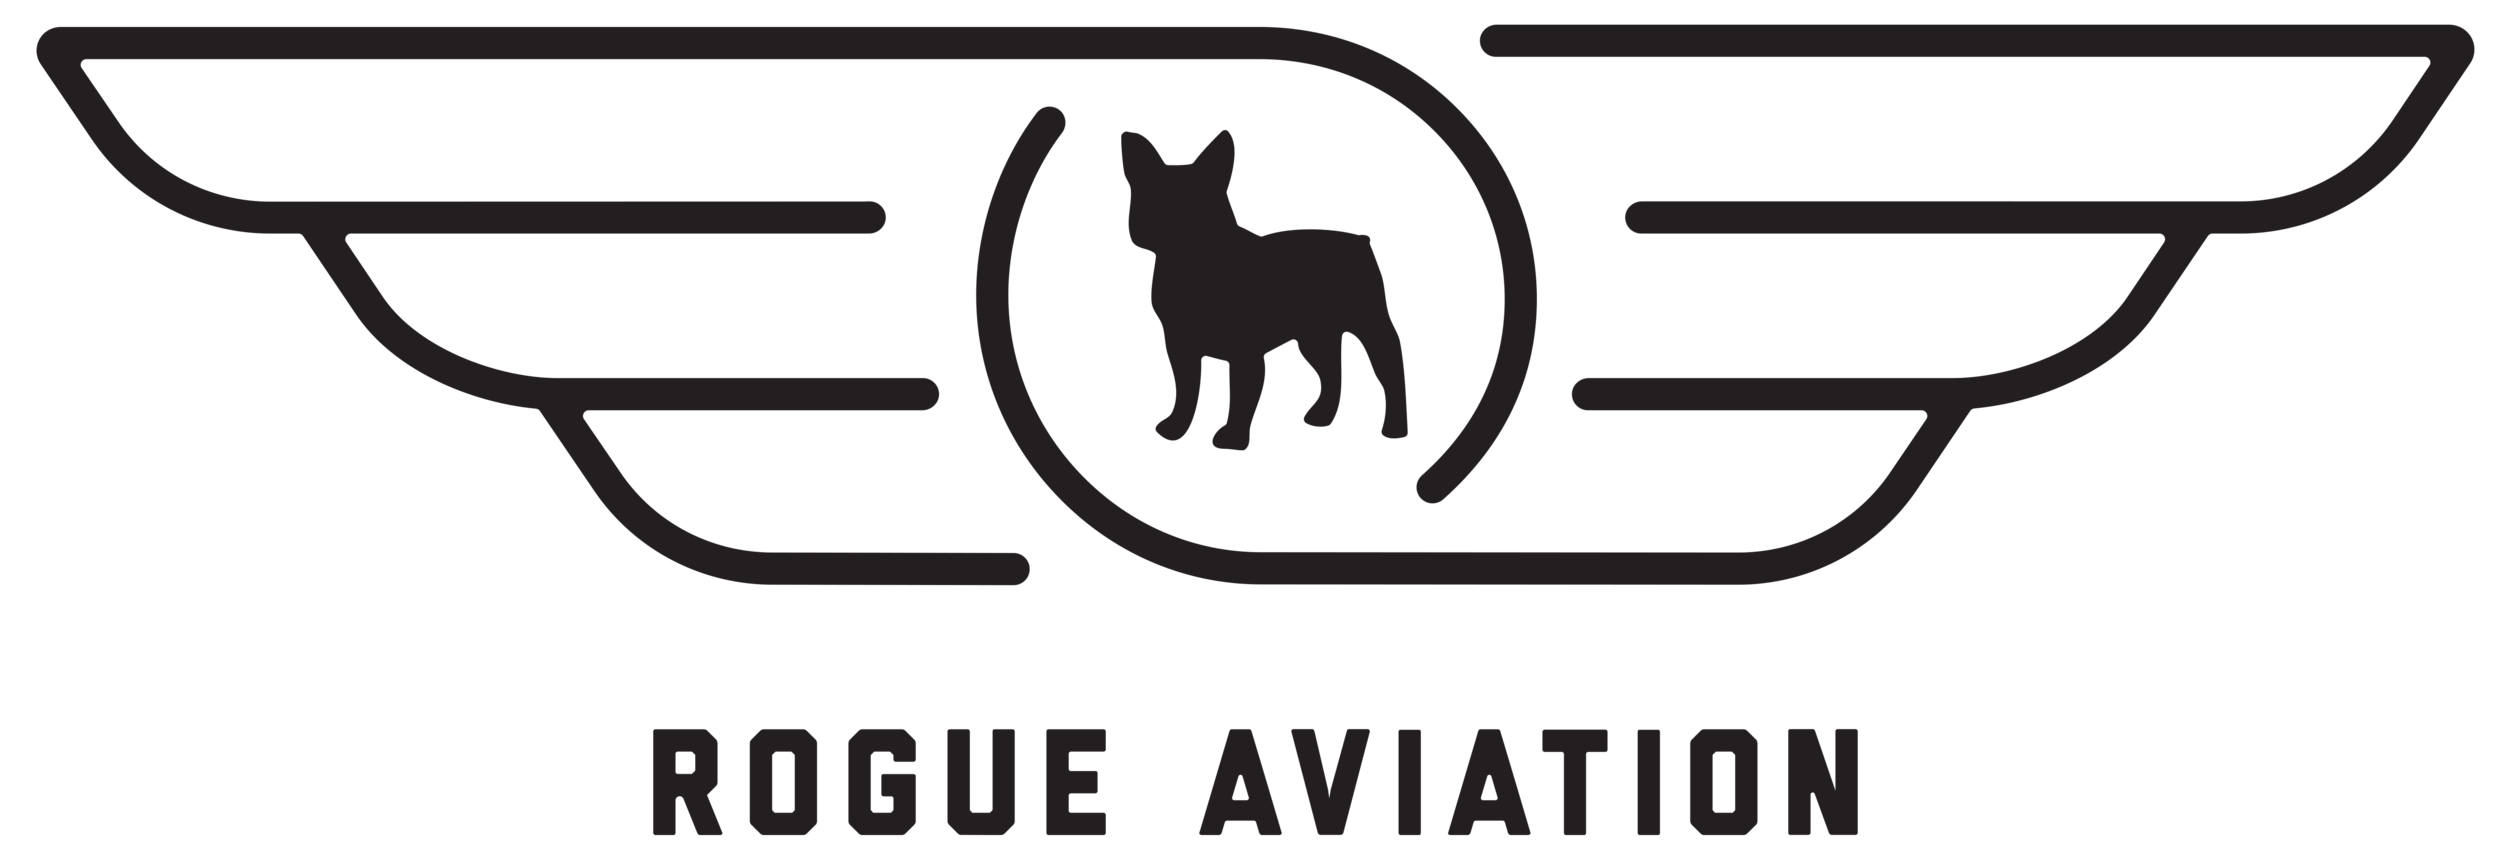 Rogue Aviation | Helicopter Flight School &amp; Tours In Orange County